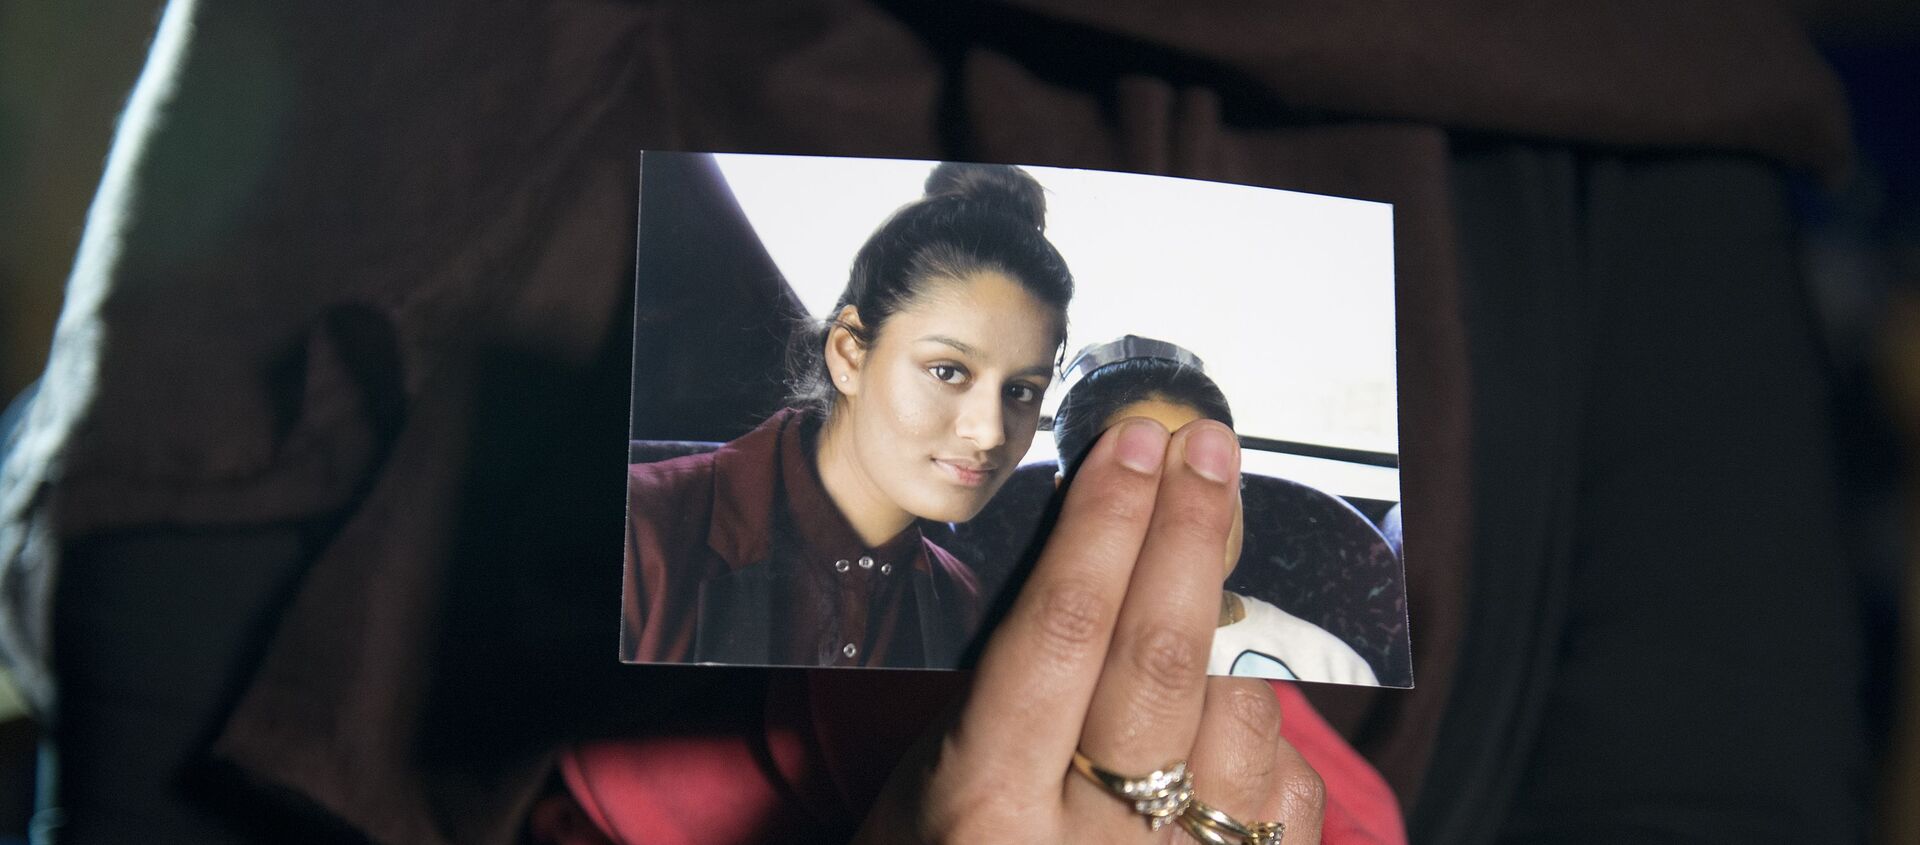 Renu, eldest sister of missing British girl Shamima Begum, holds a picture of her sister while being interviewed by the media in central London, on February 22, 2015. Britain debated Sunday how to stop teenage girls joining the Islamic State group in Syria after three high-achieving youngsters became the latest to run away from home. Close schoolfriends Kadiza Sultana, 17, and 15-year-olds Shamima Begum and Amira Abase left their east London homes on Tuesday and flew to Istanbul, raising concerns they would travel on to Syria to join IS jihadists.  - Sputnik International, 1920, 15.12.2020